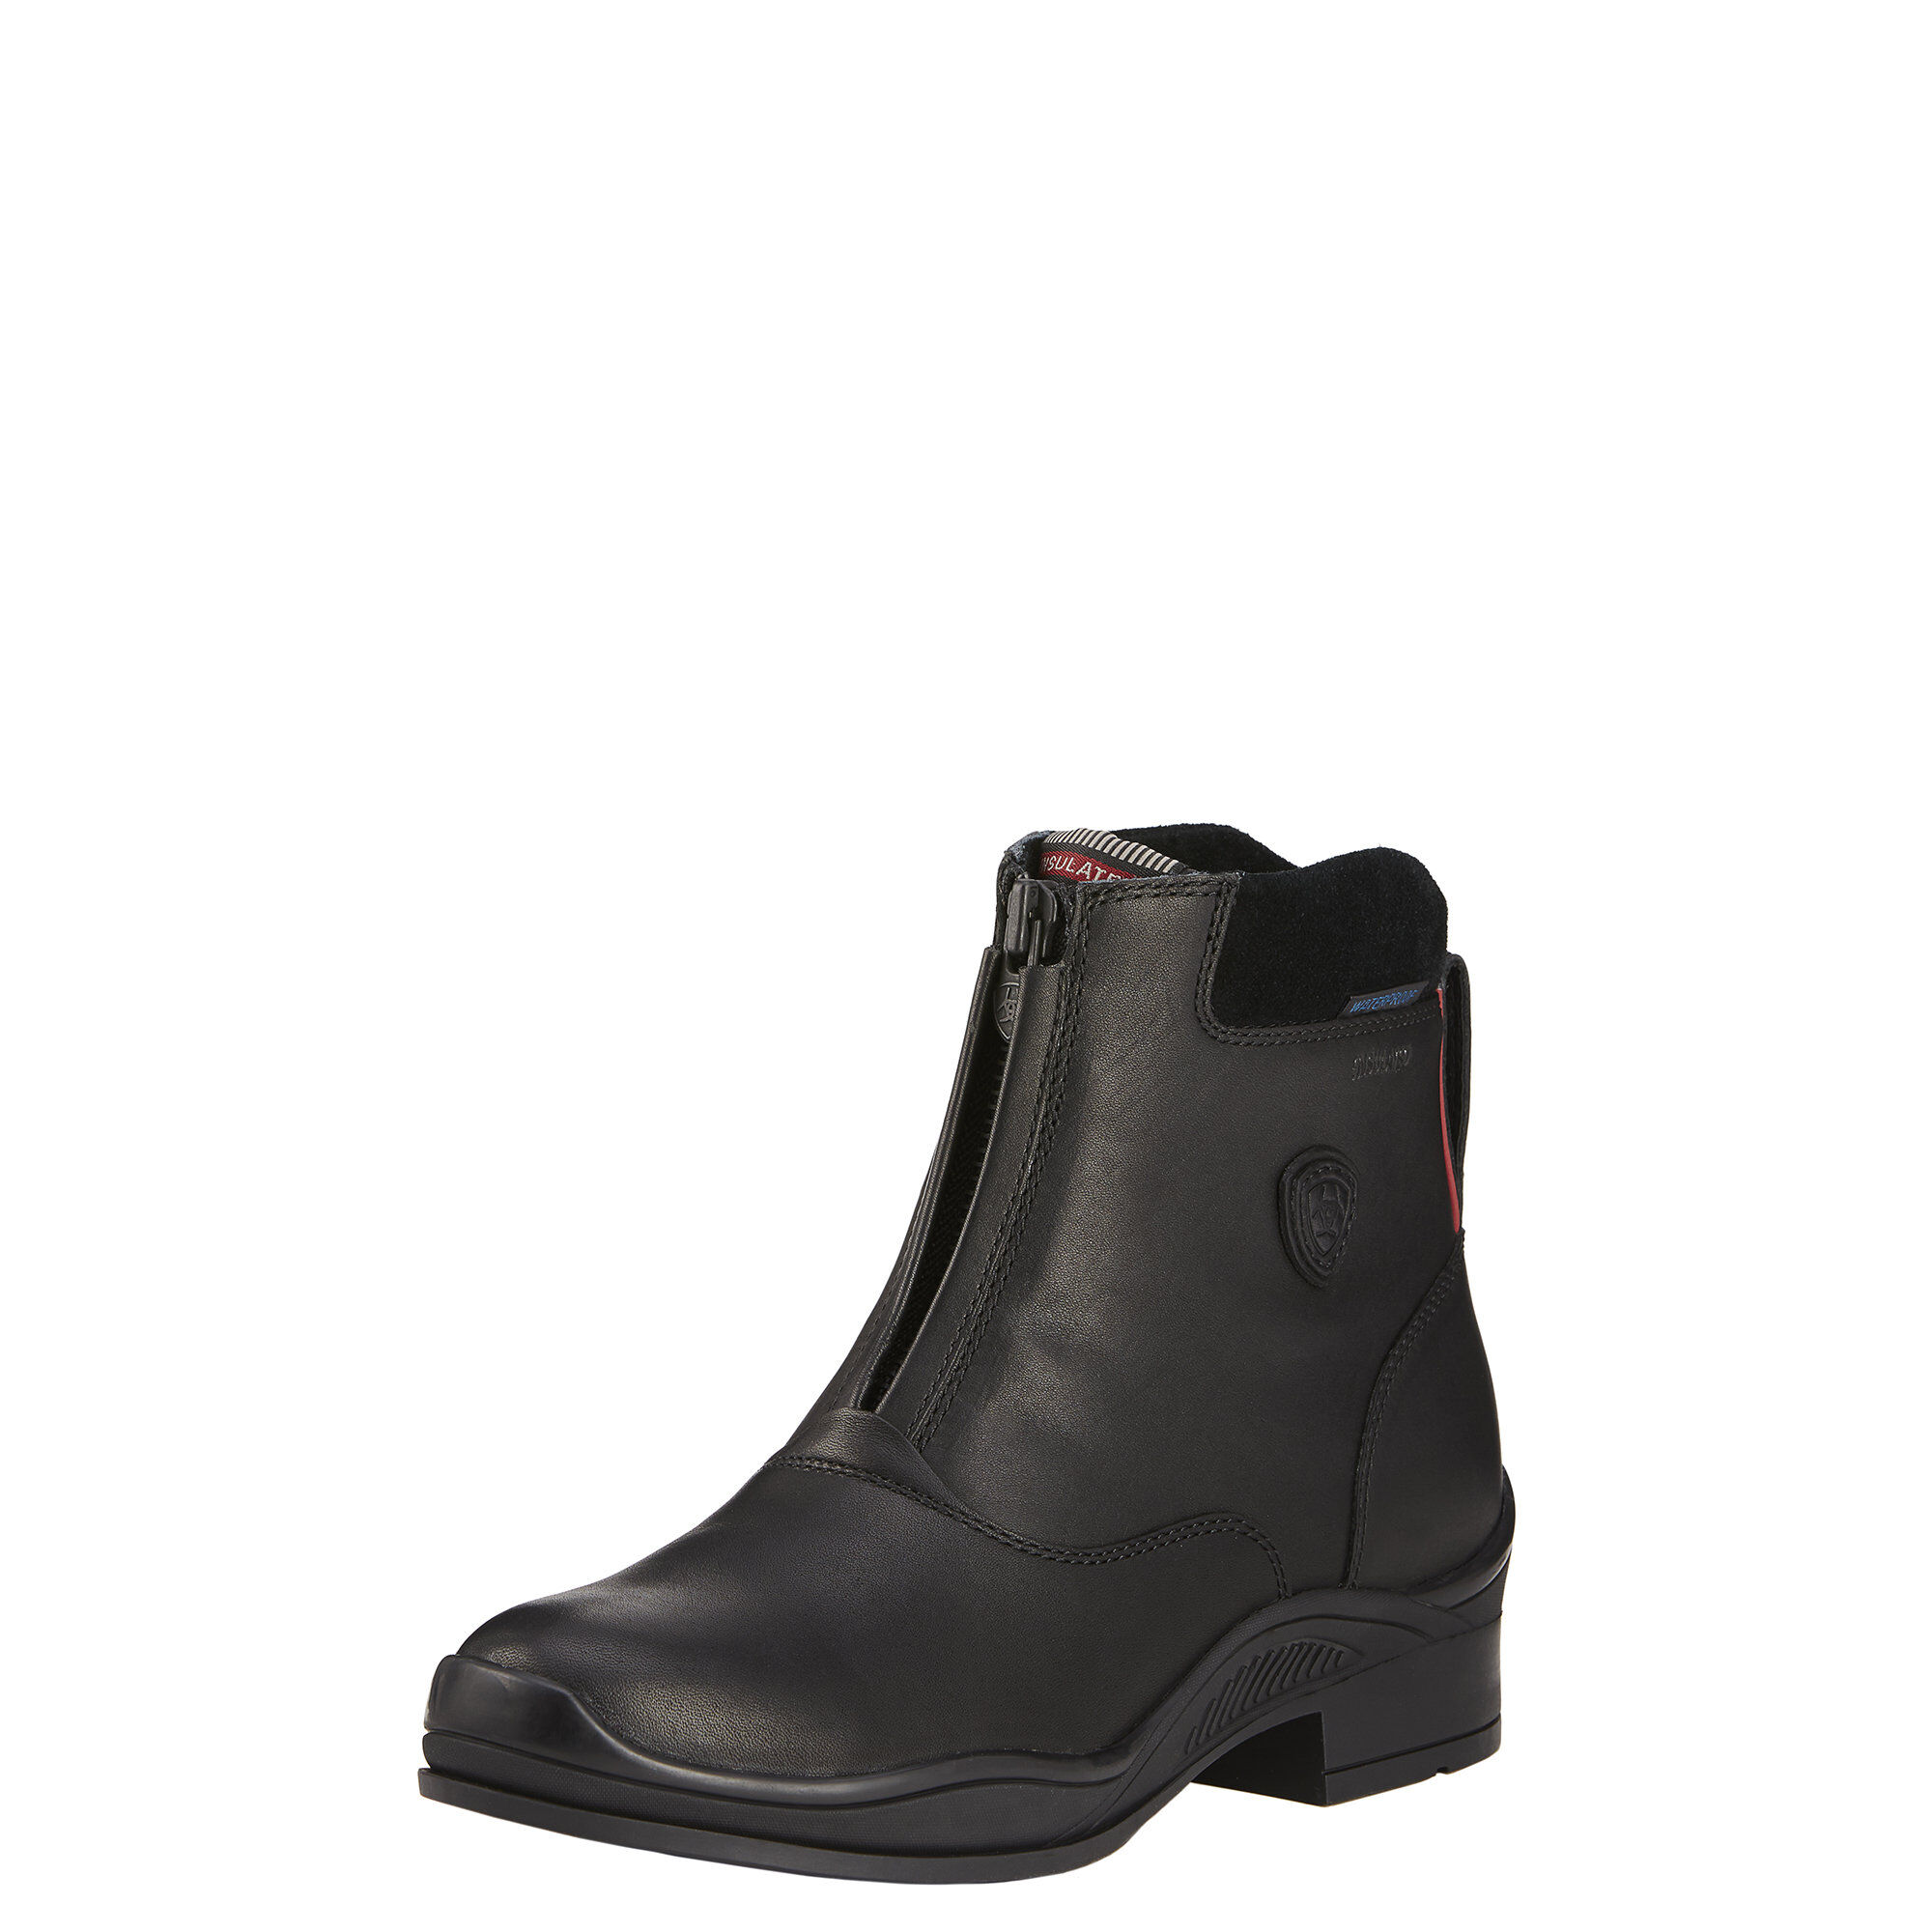 Women's Extreme Zip Paddock Waterproof Insulated Paddock Boots in Black Leather  by Ariat